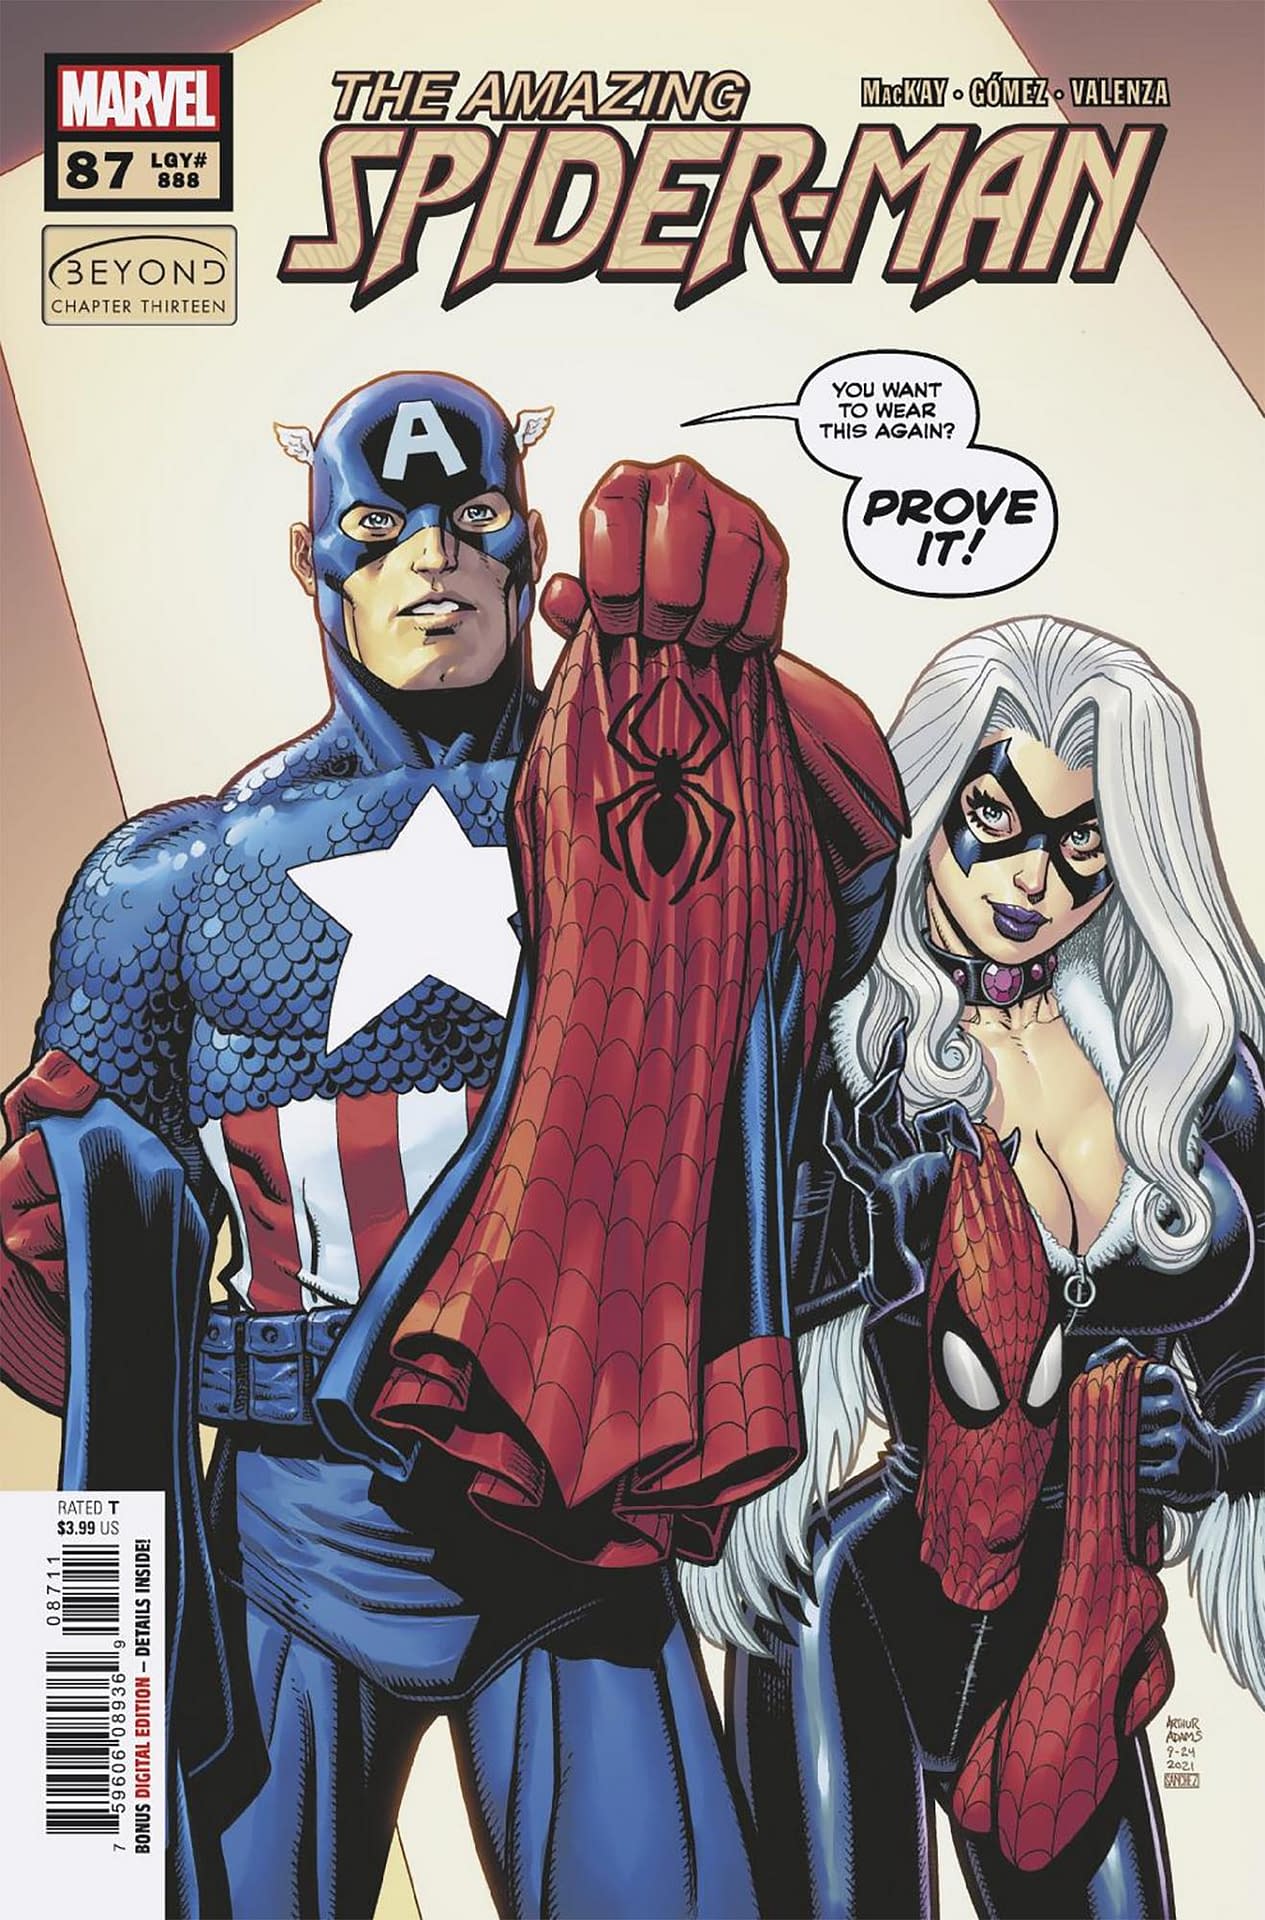 Amazing Spider-Man #87 Preview: Swinging with the Black Cat